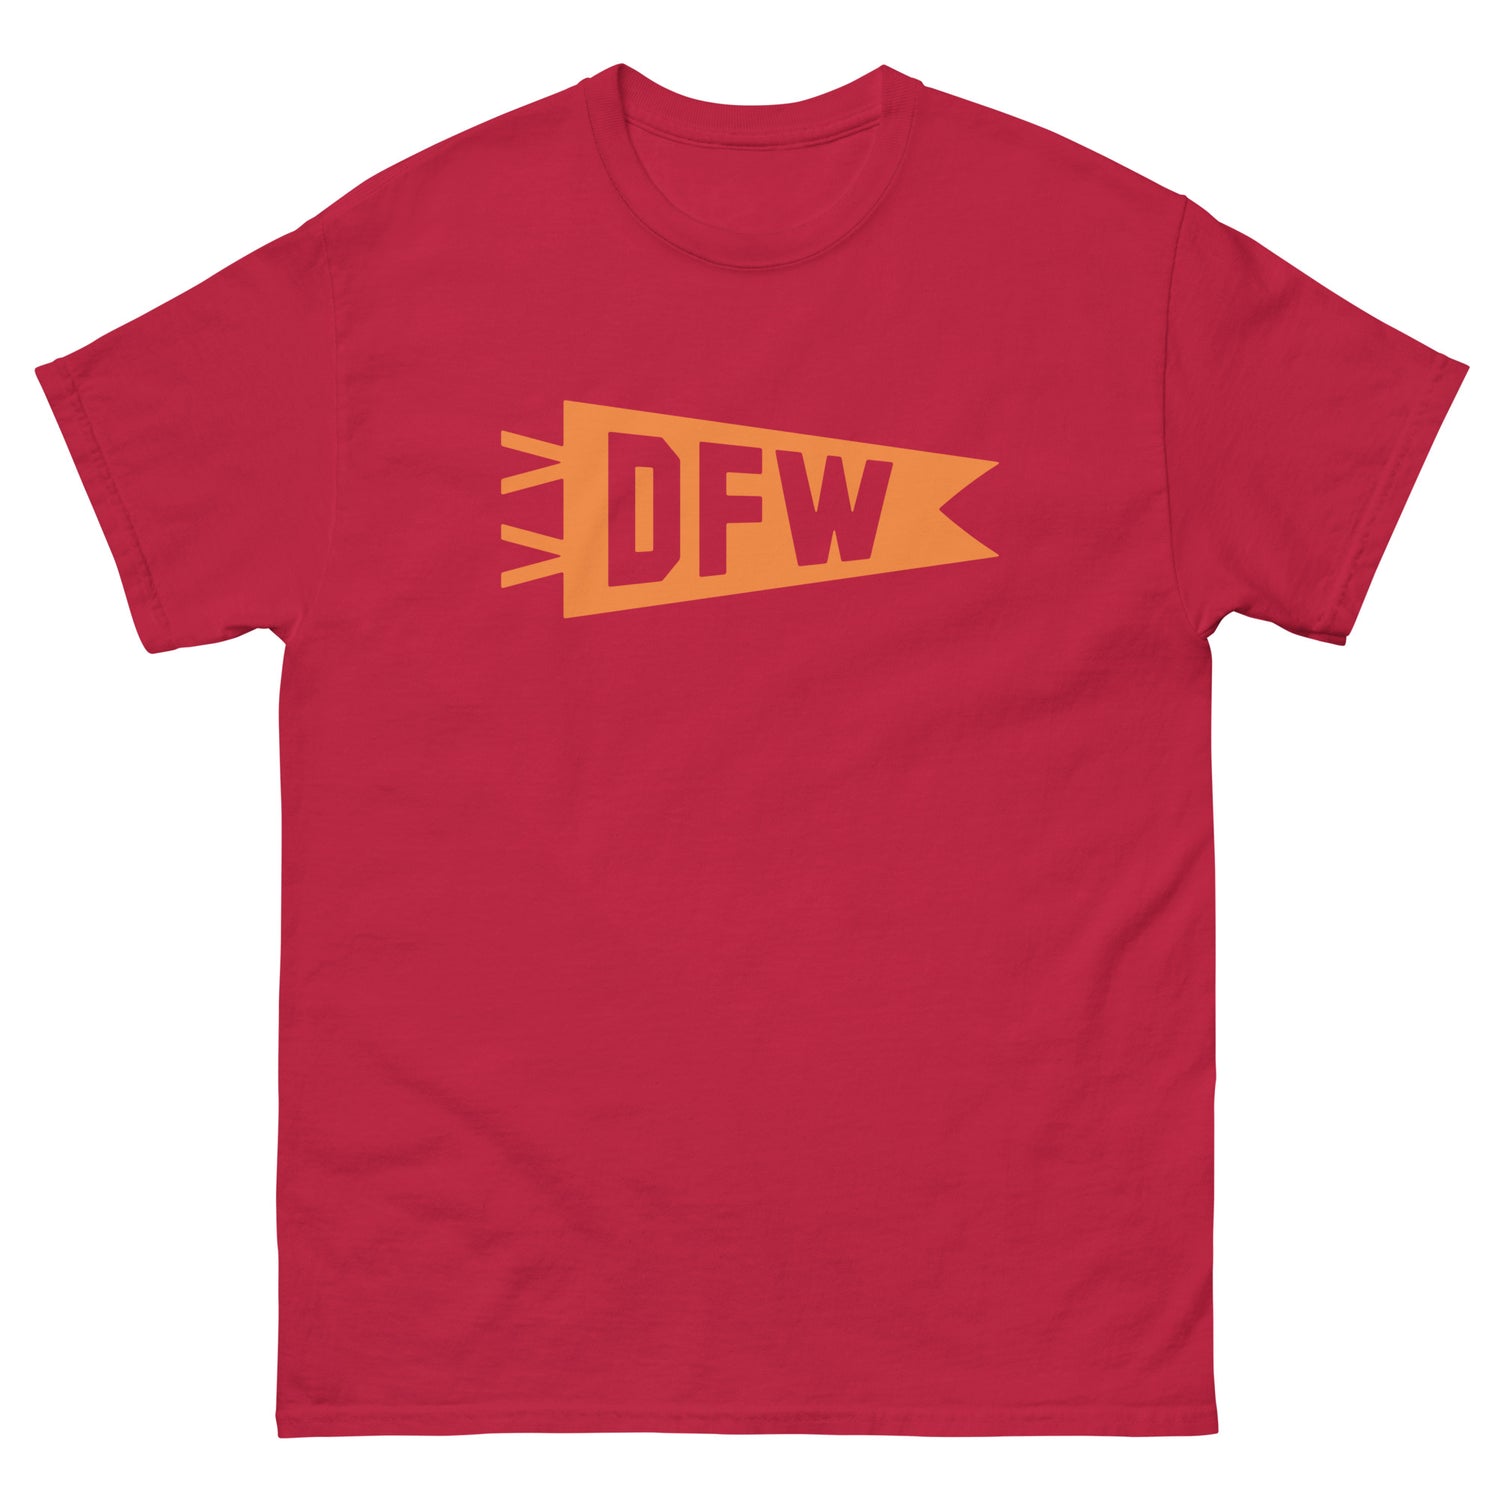 Dallas Texas Adult T-Shirts • DFW Airport Code